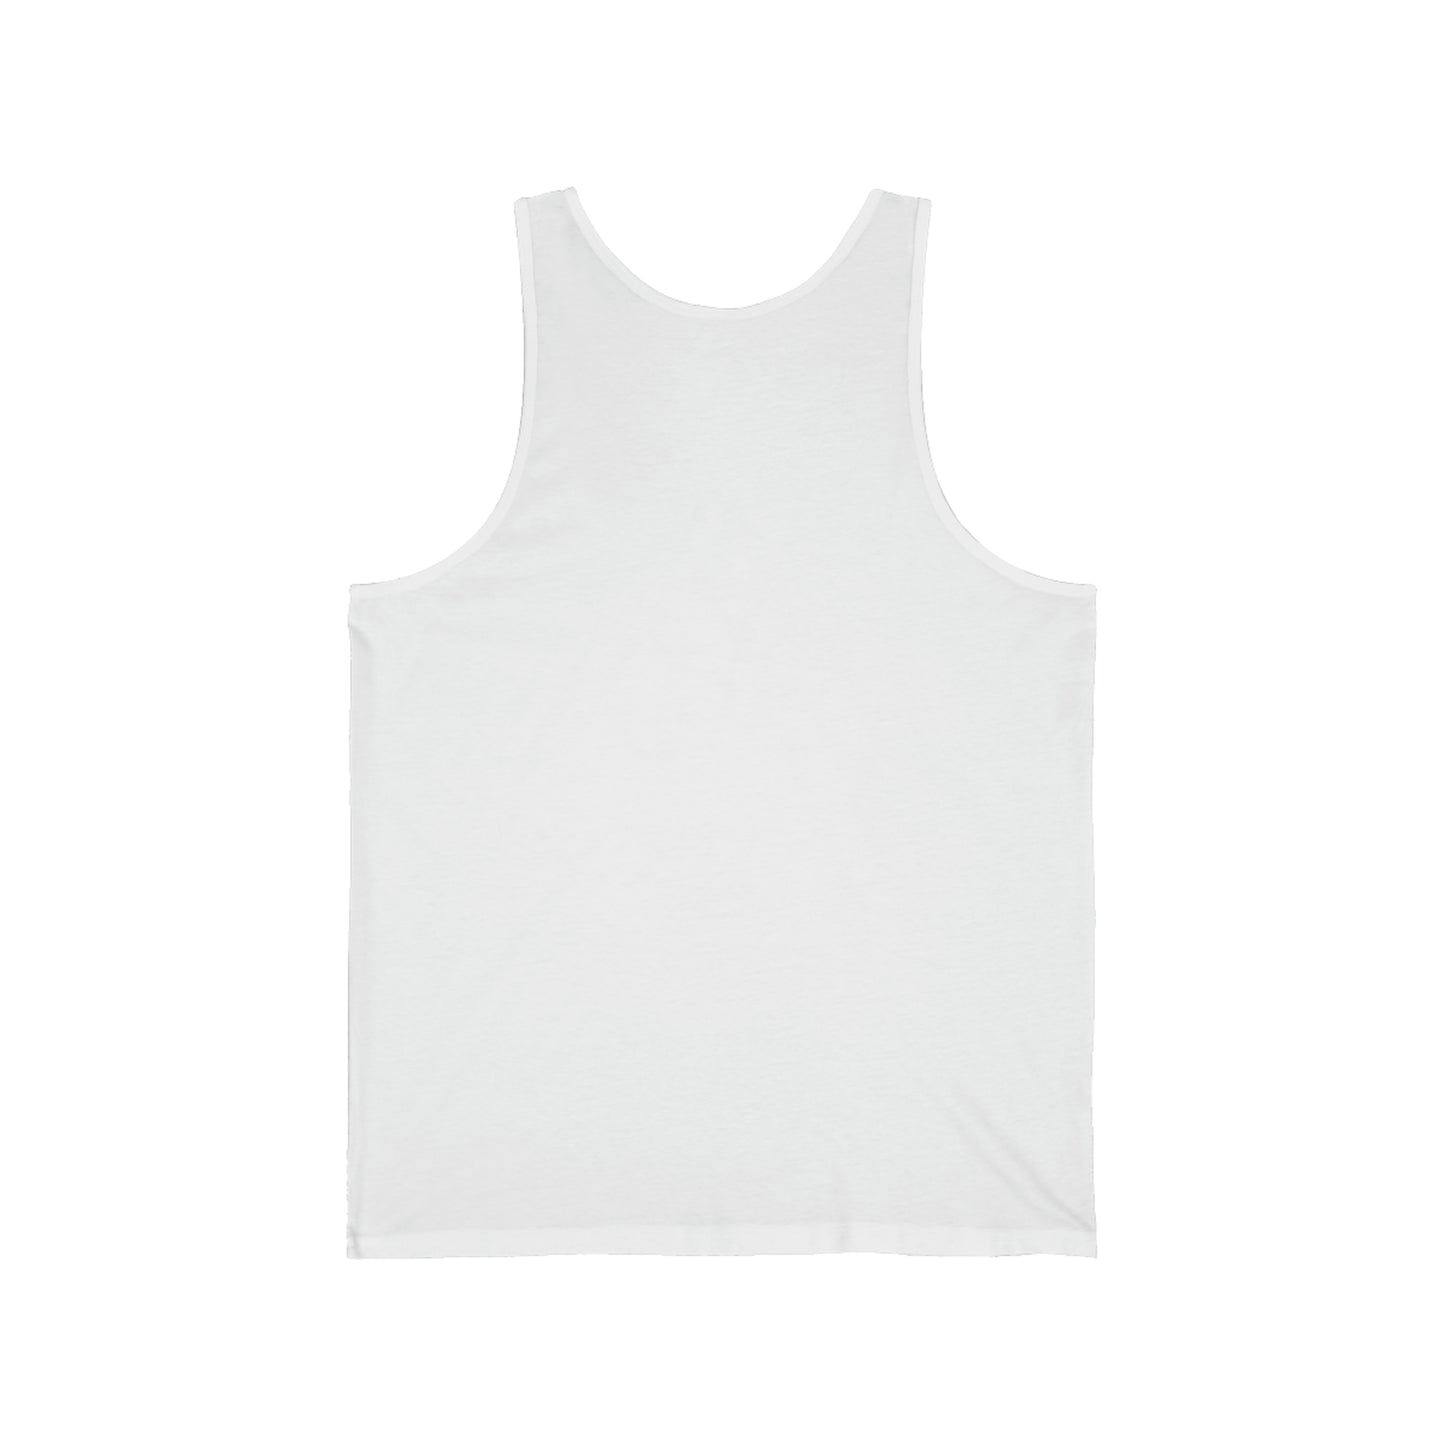 There's the Y Unisex Jersey Tank